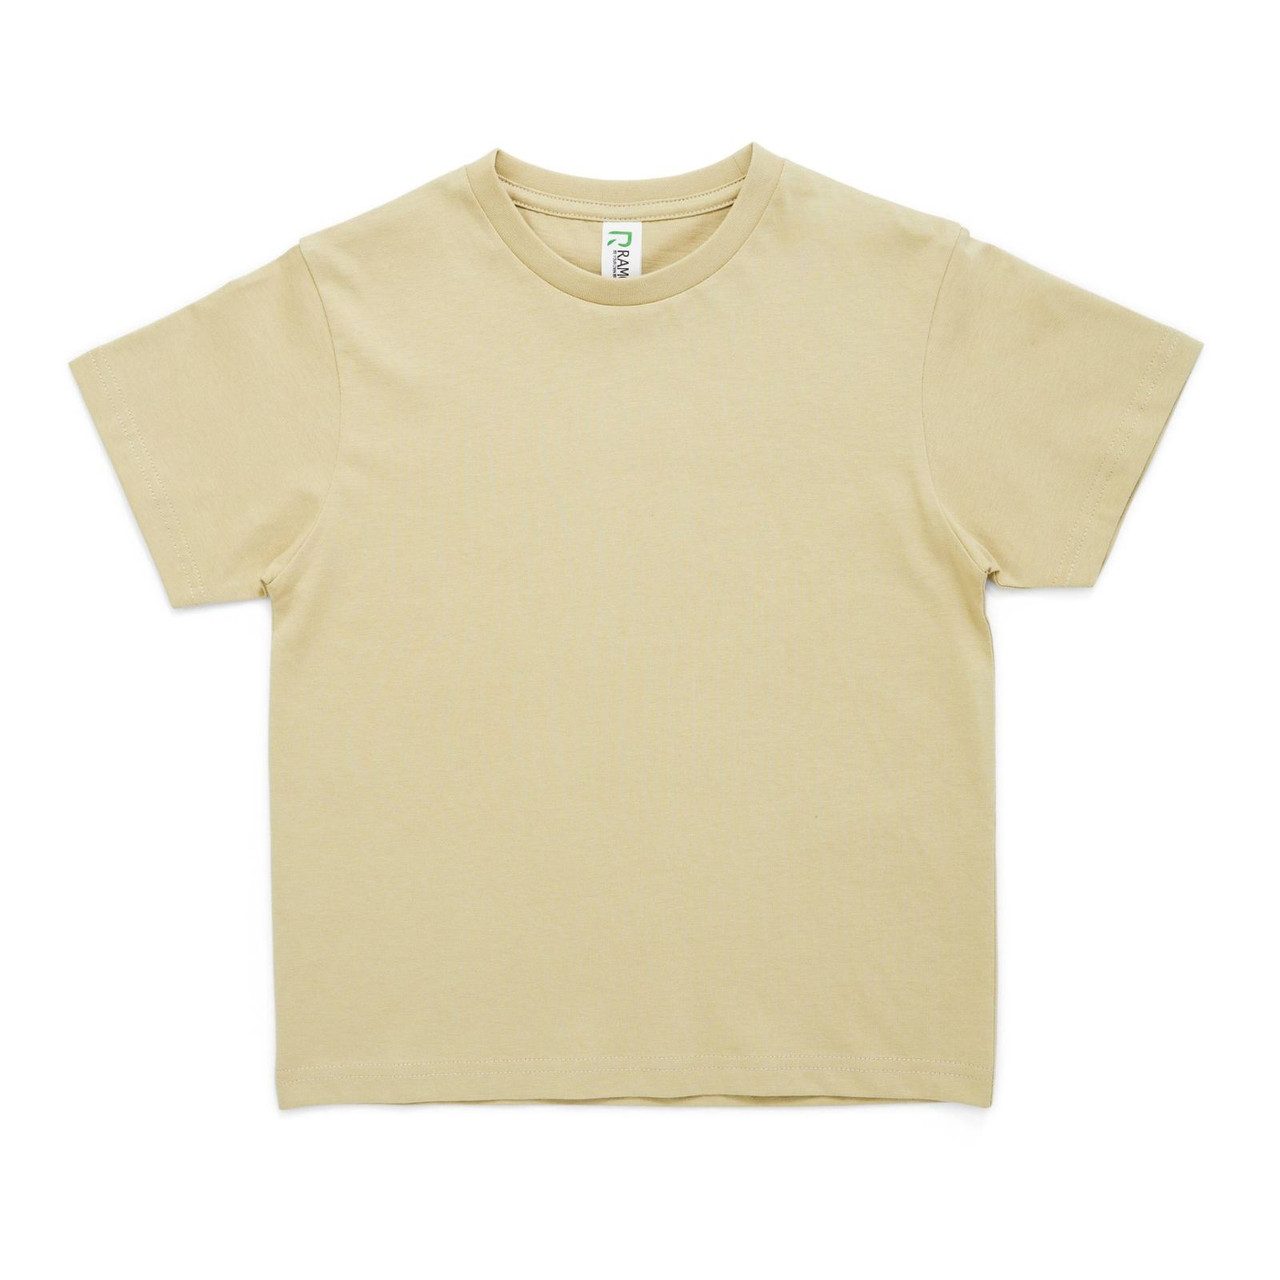 Kids & Baby Plain Soft Cotton Tshirts | Shop online at Blank Clothing ...